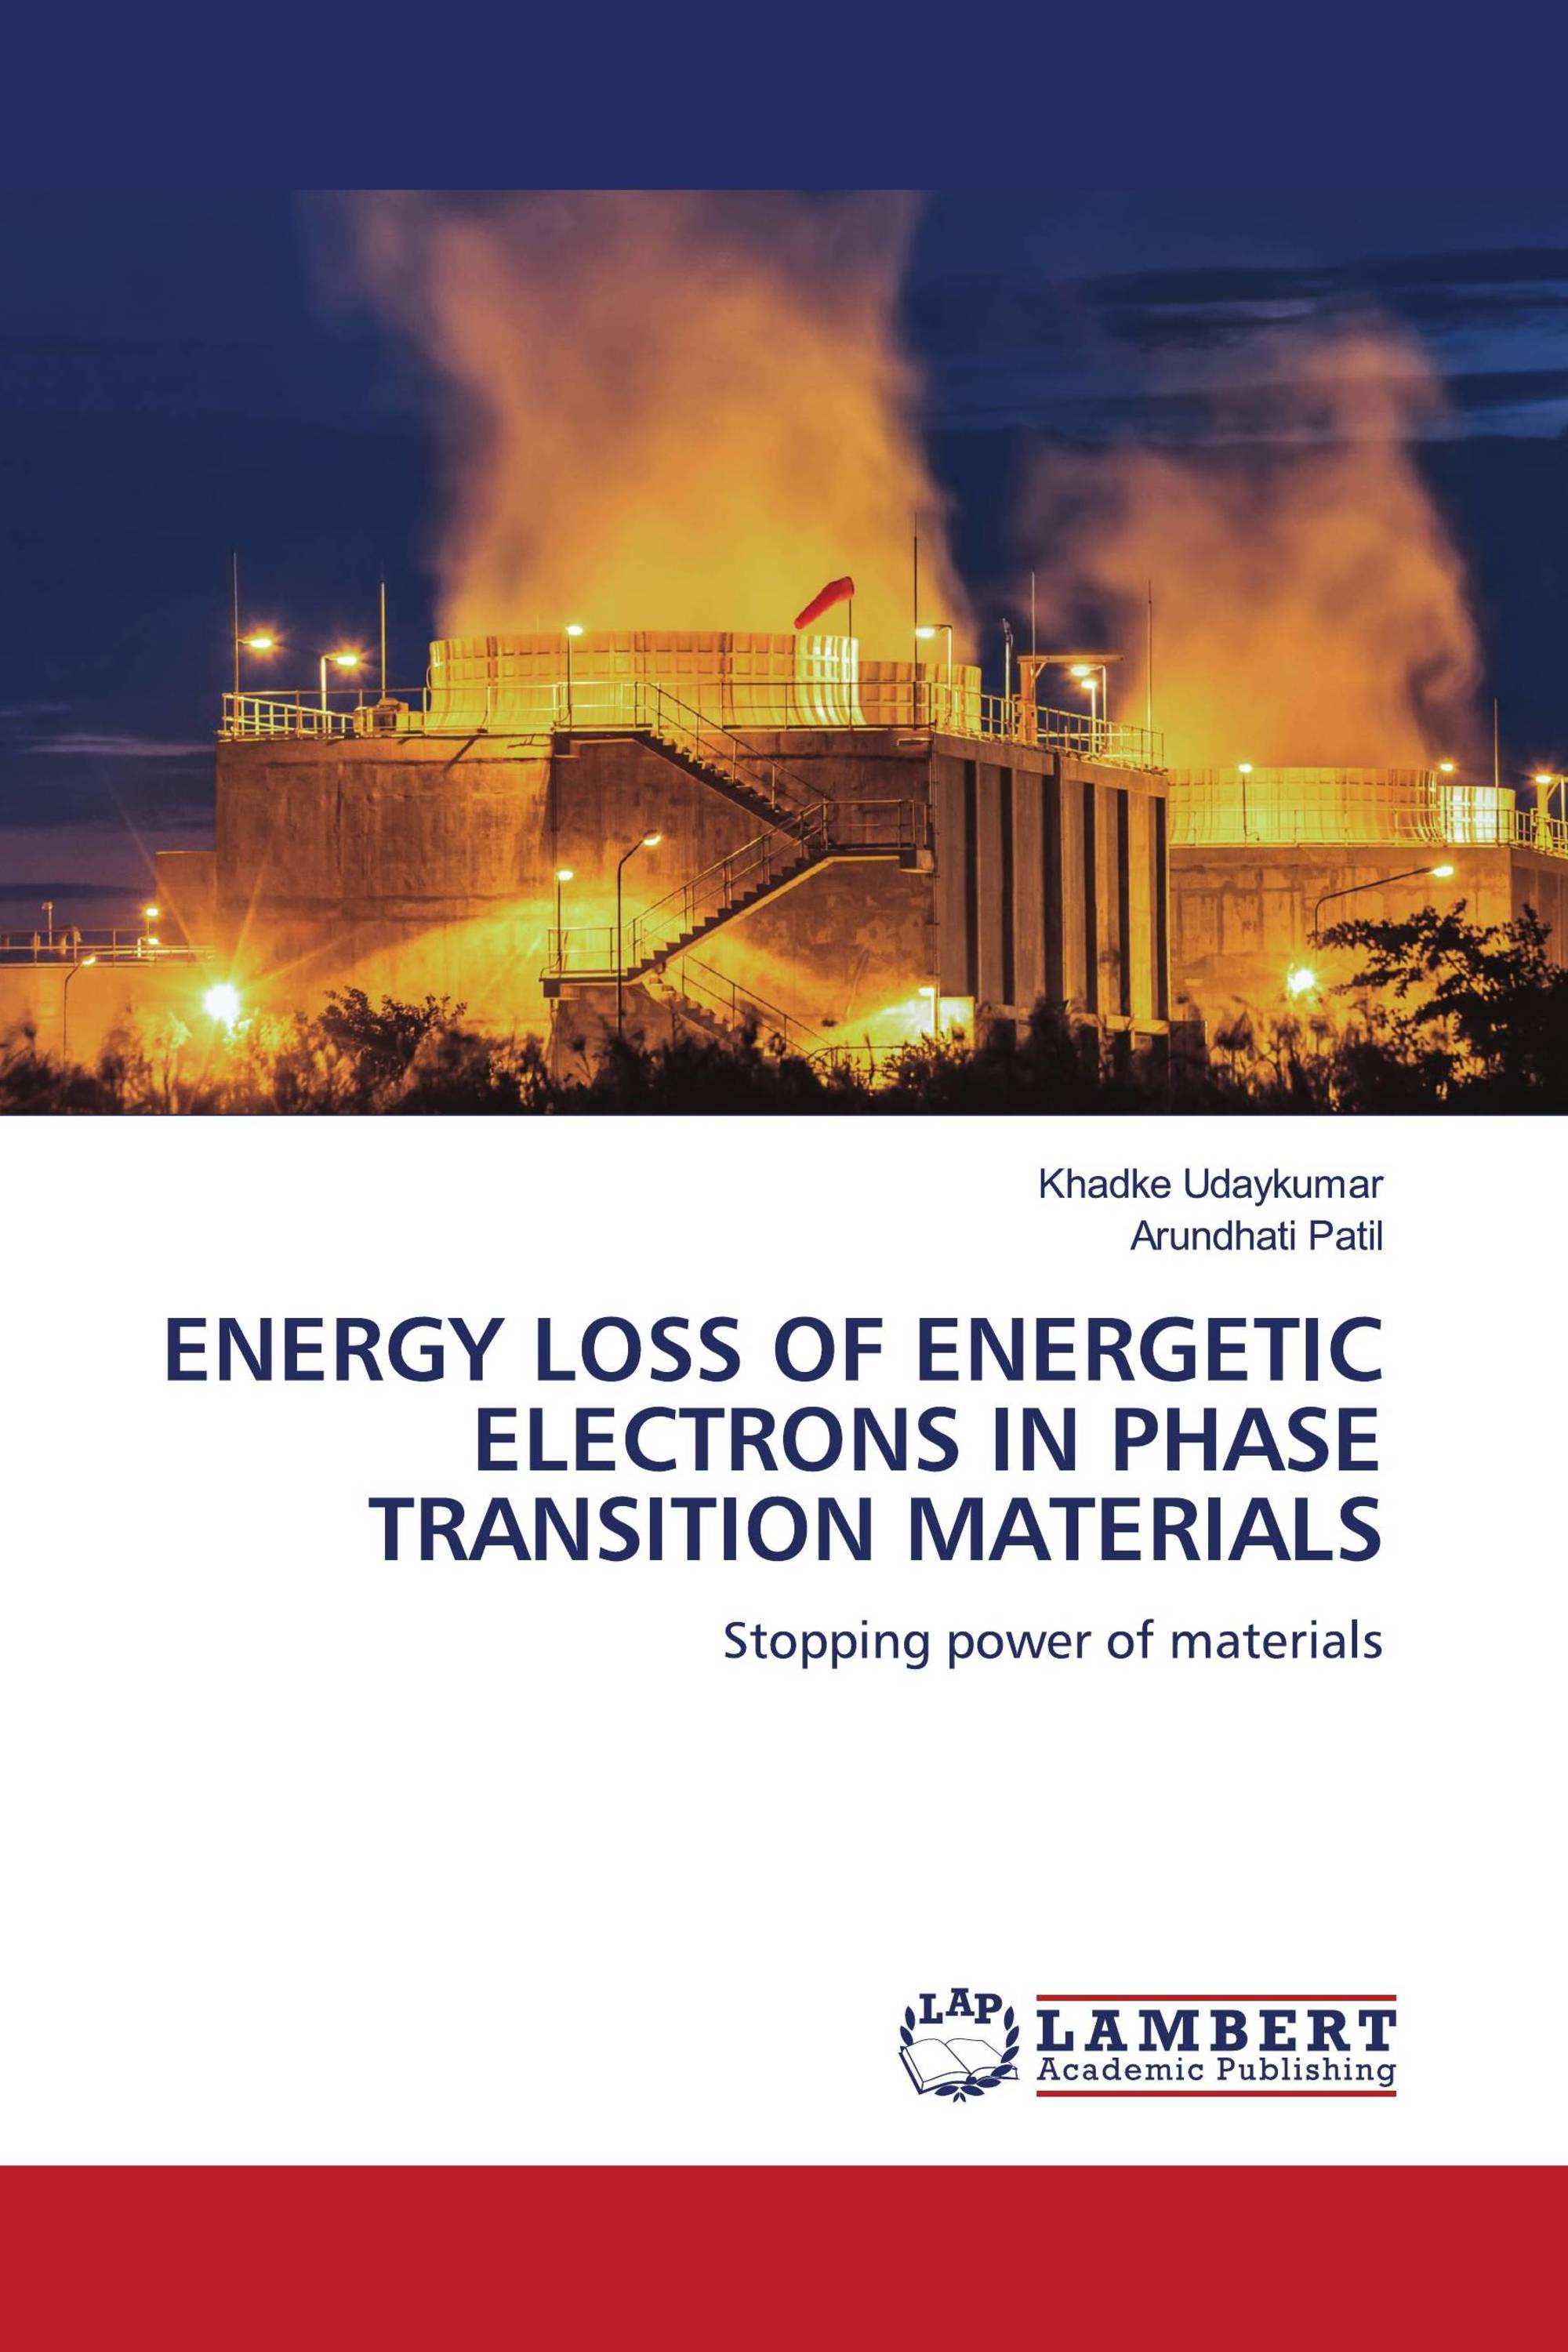 ENERGY LOSS OF ENERGETIC ELECTRONS IN PHASE TRANSITION MATERIALS